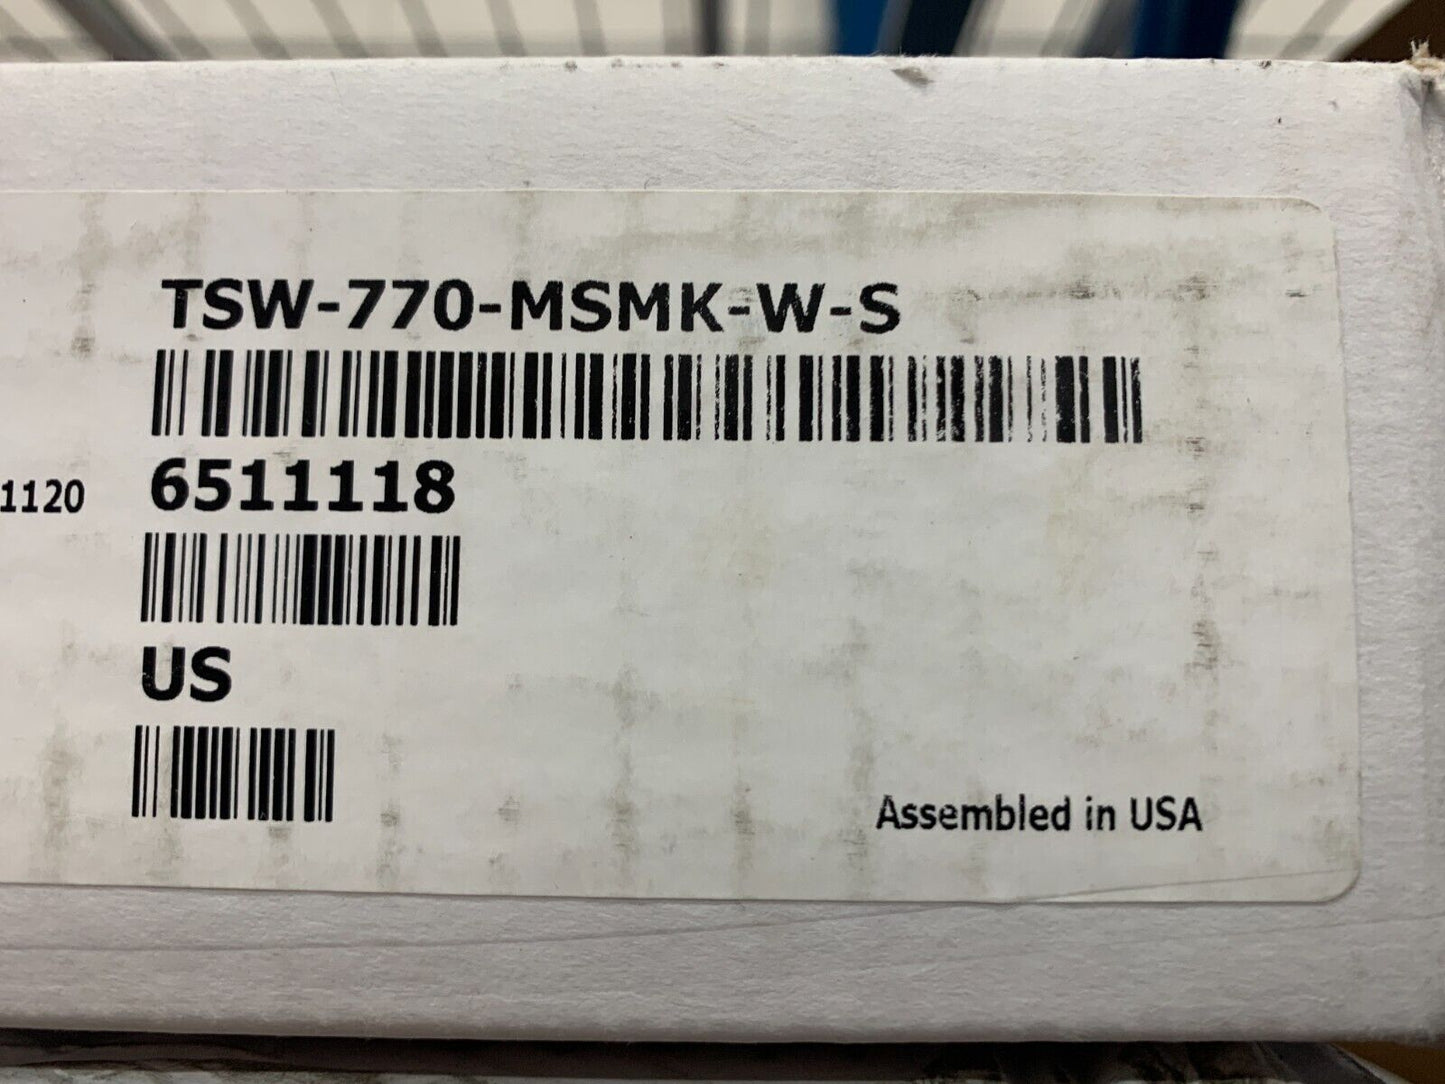 Crestron TSW-770-MSMK-W-S Multi-Surface Mount Kit for Touchpanel/Screen- 6511118